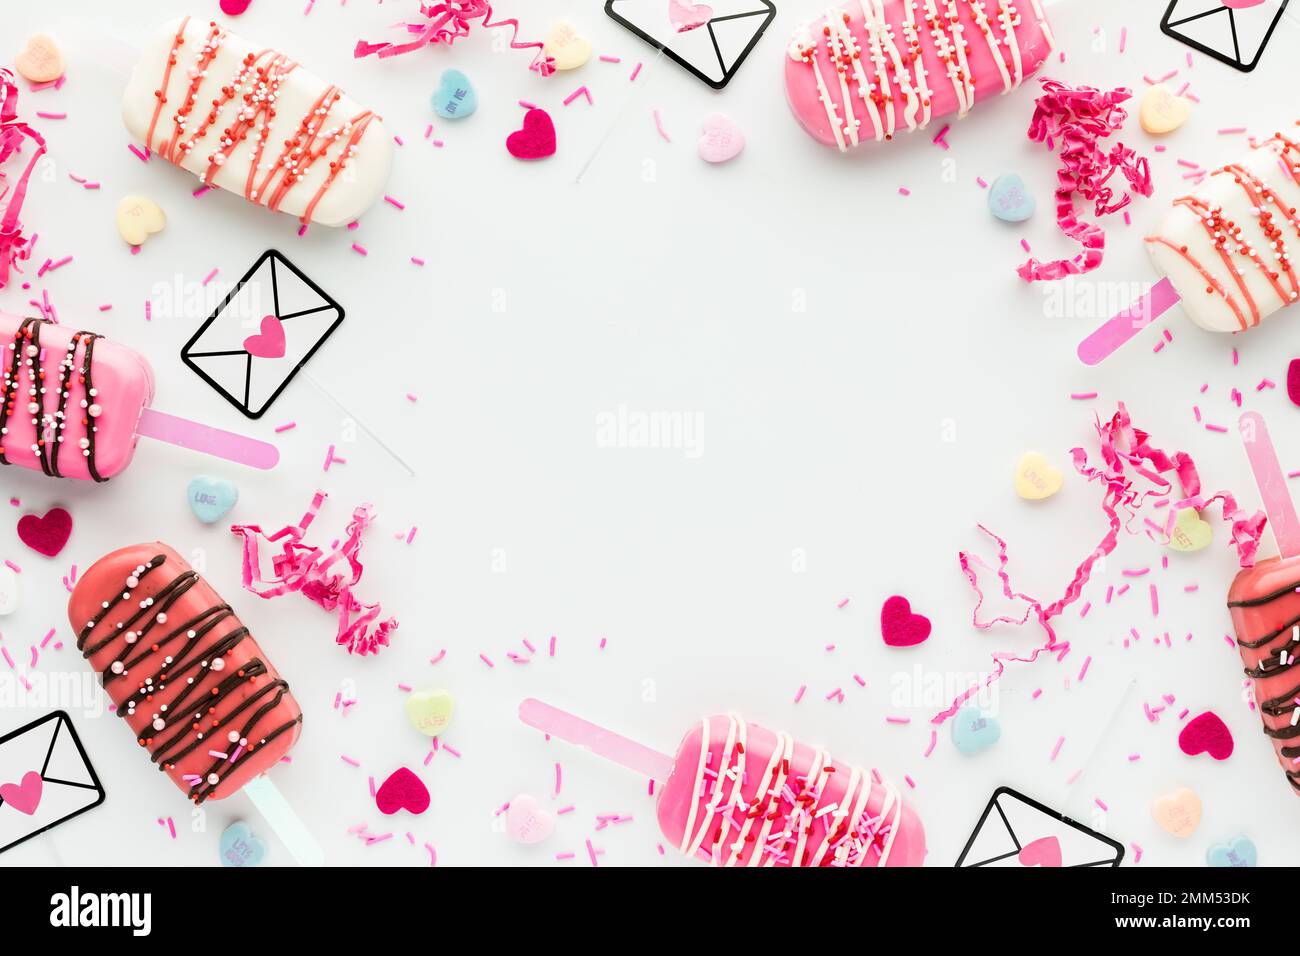 Flatlay collage of Valentine cakesicles and assorted decorations in a border. Stock Photo